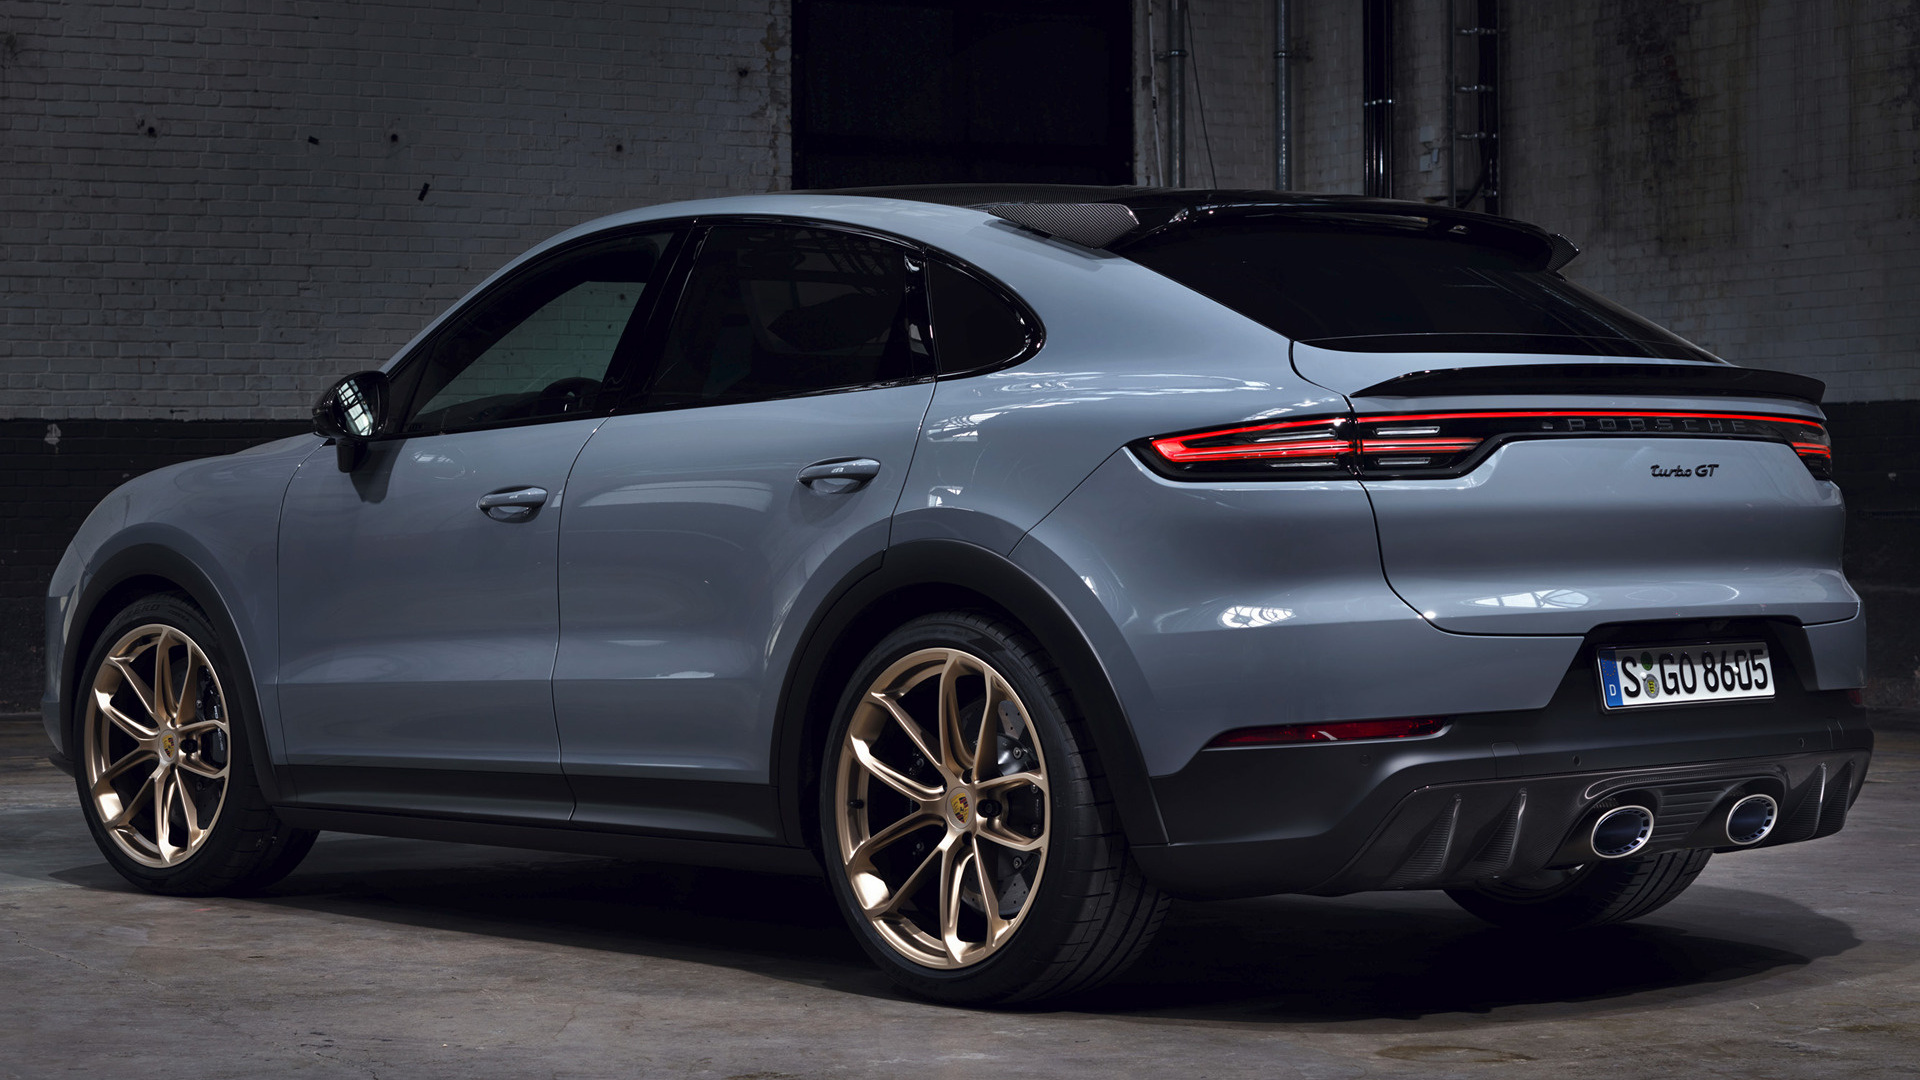 Porsche Cayenne Turbo GT 2021 review: the SUV supercar